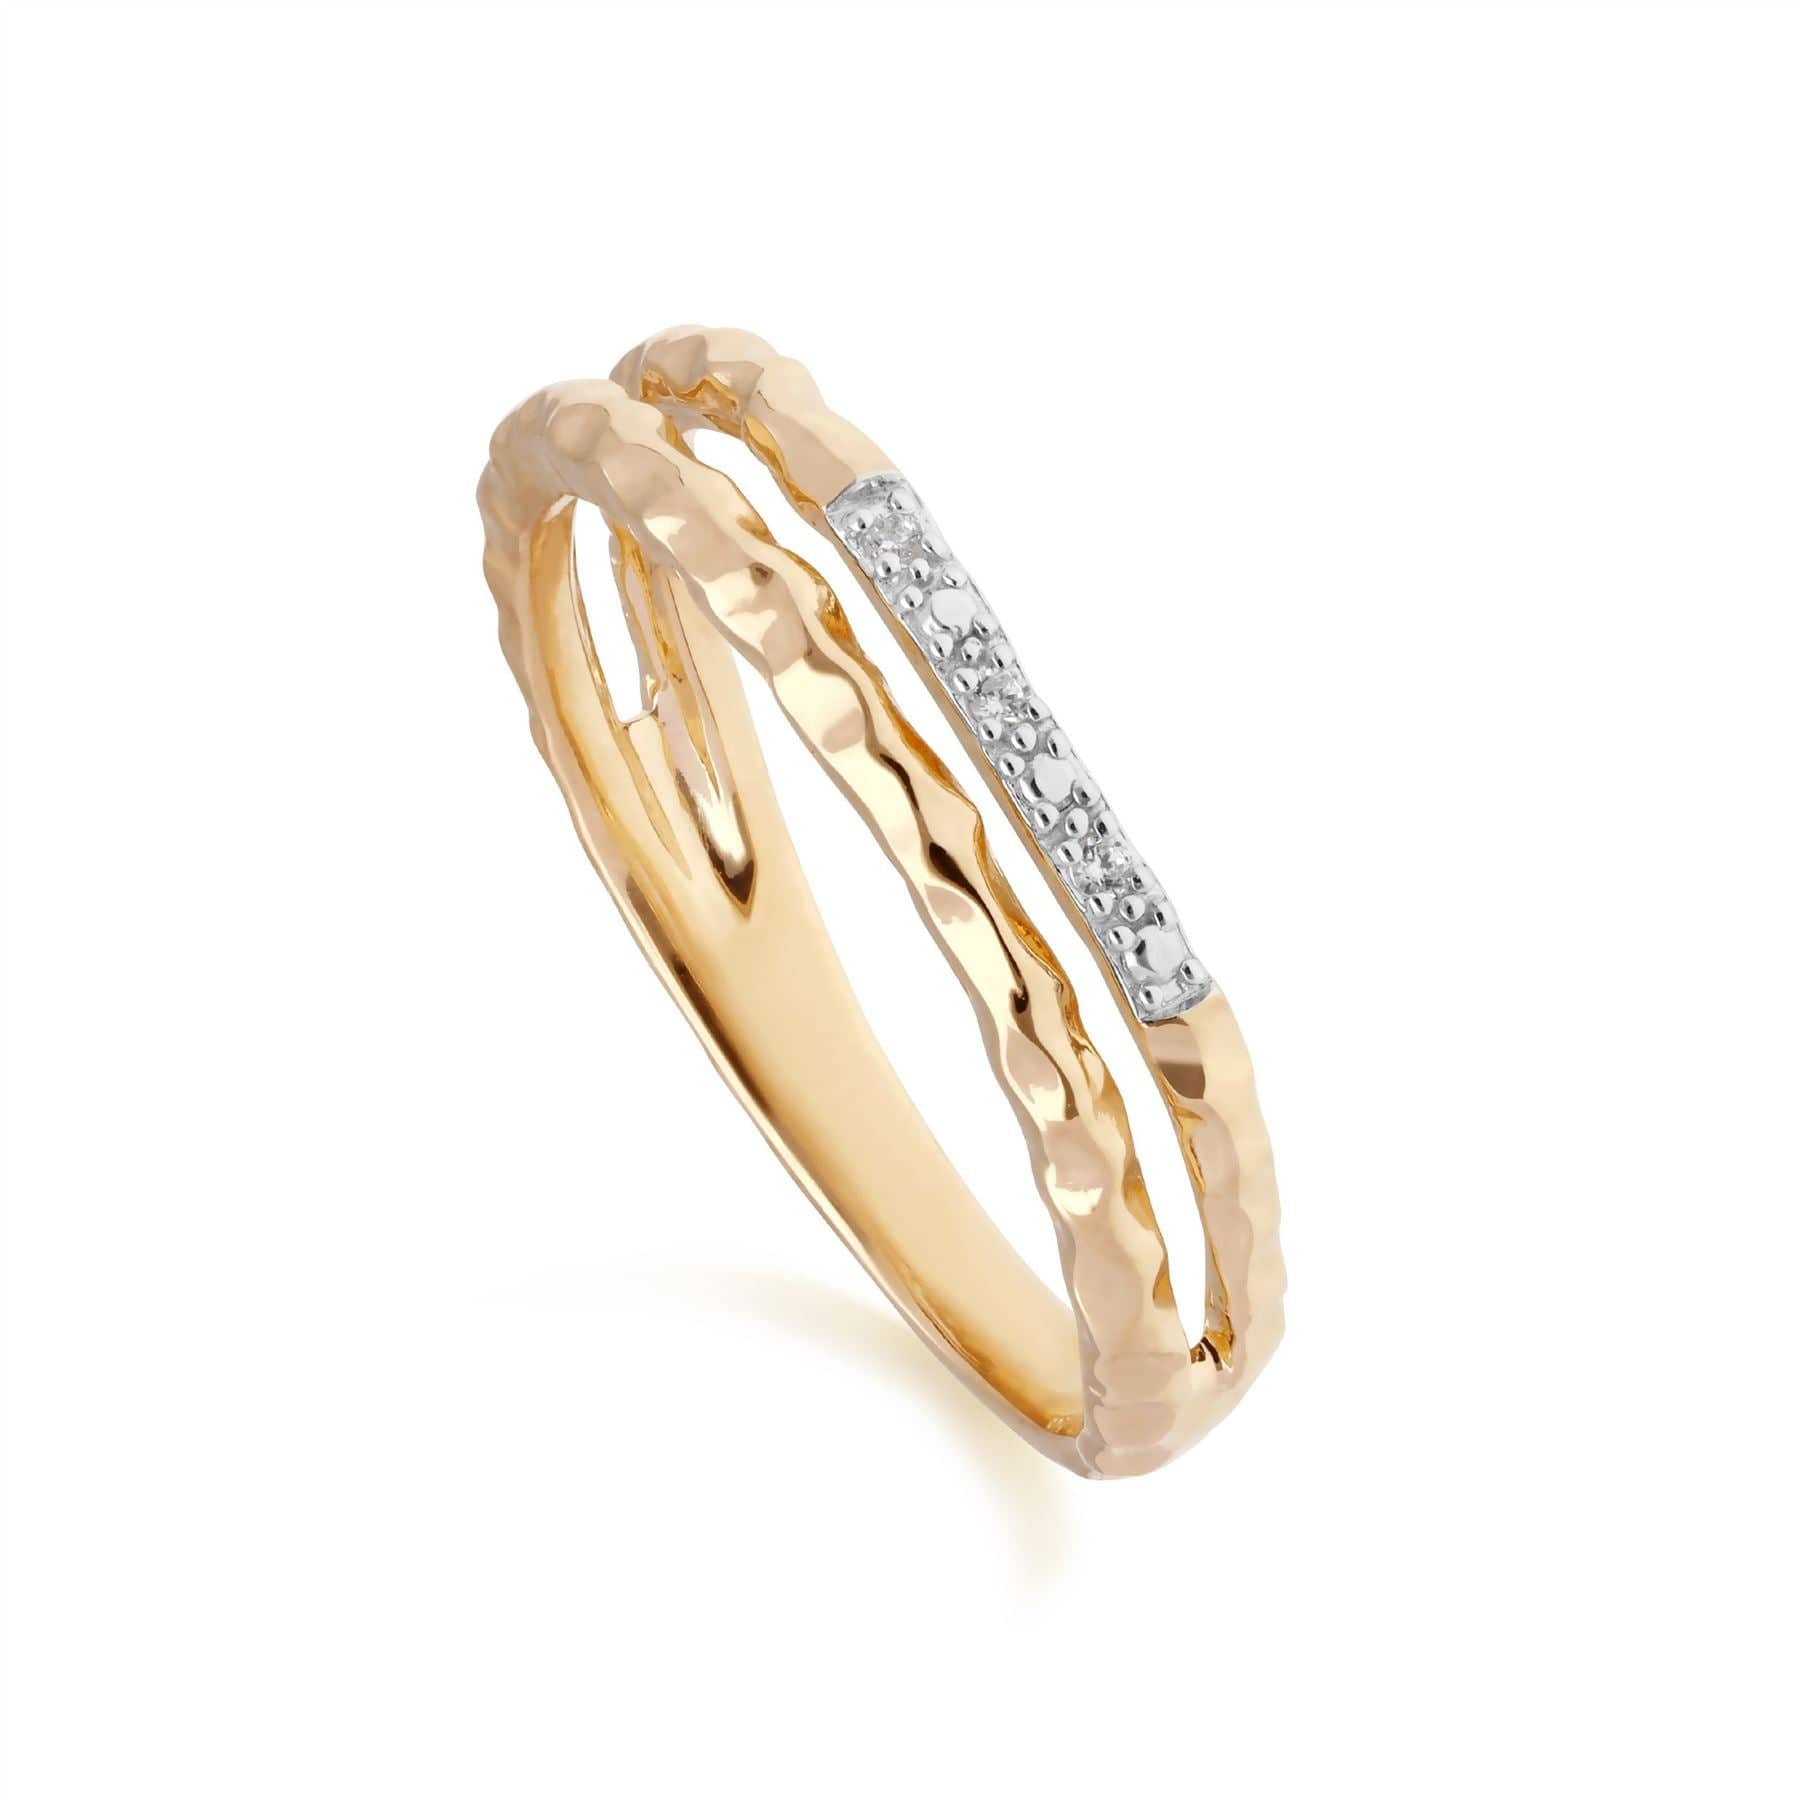 191R0909019 Diamond Pavé Hammered Double Band Ring in 9ct Yellow Gold 1